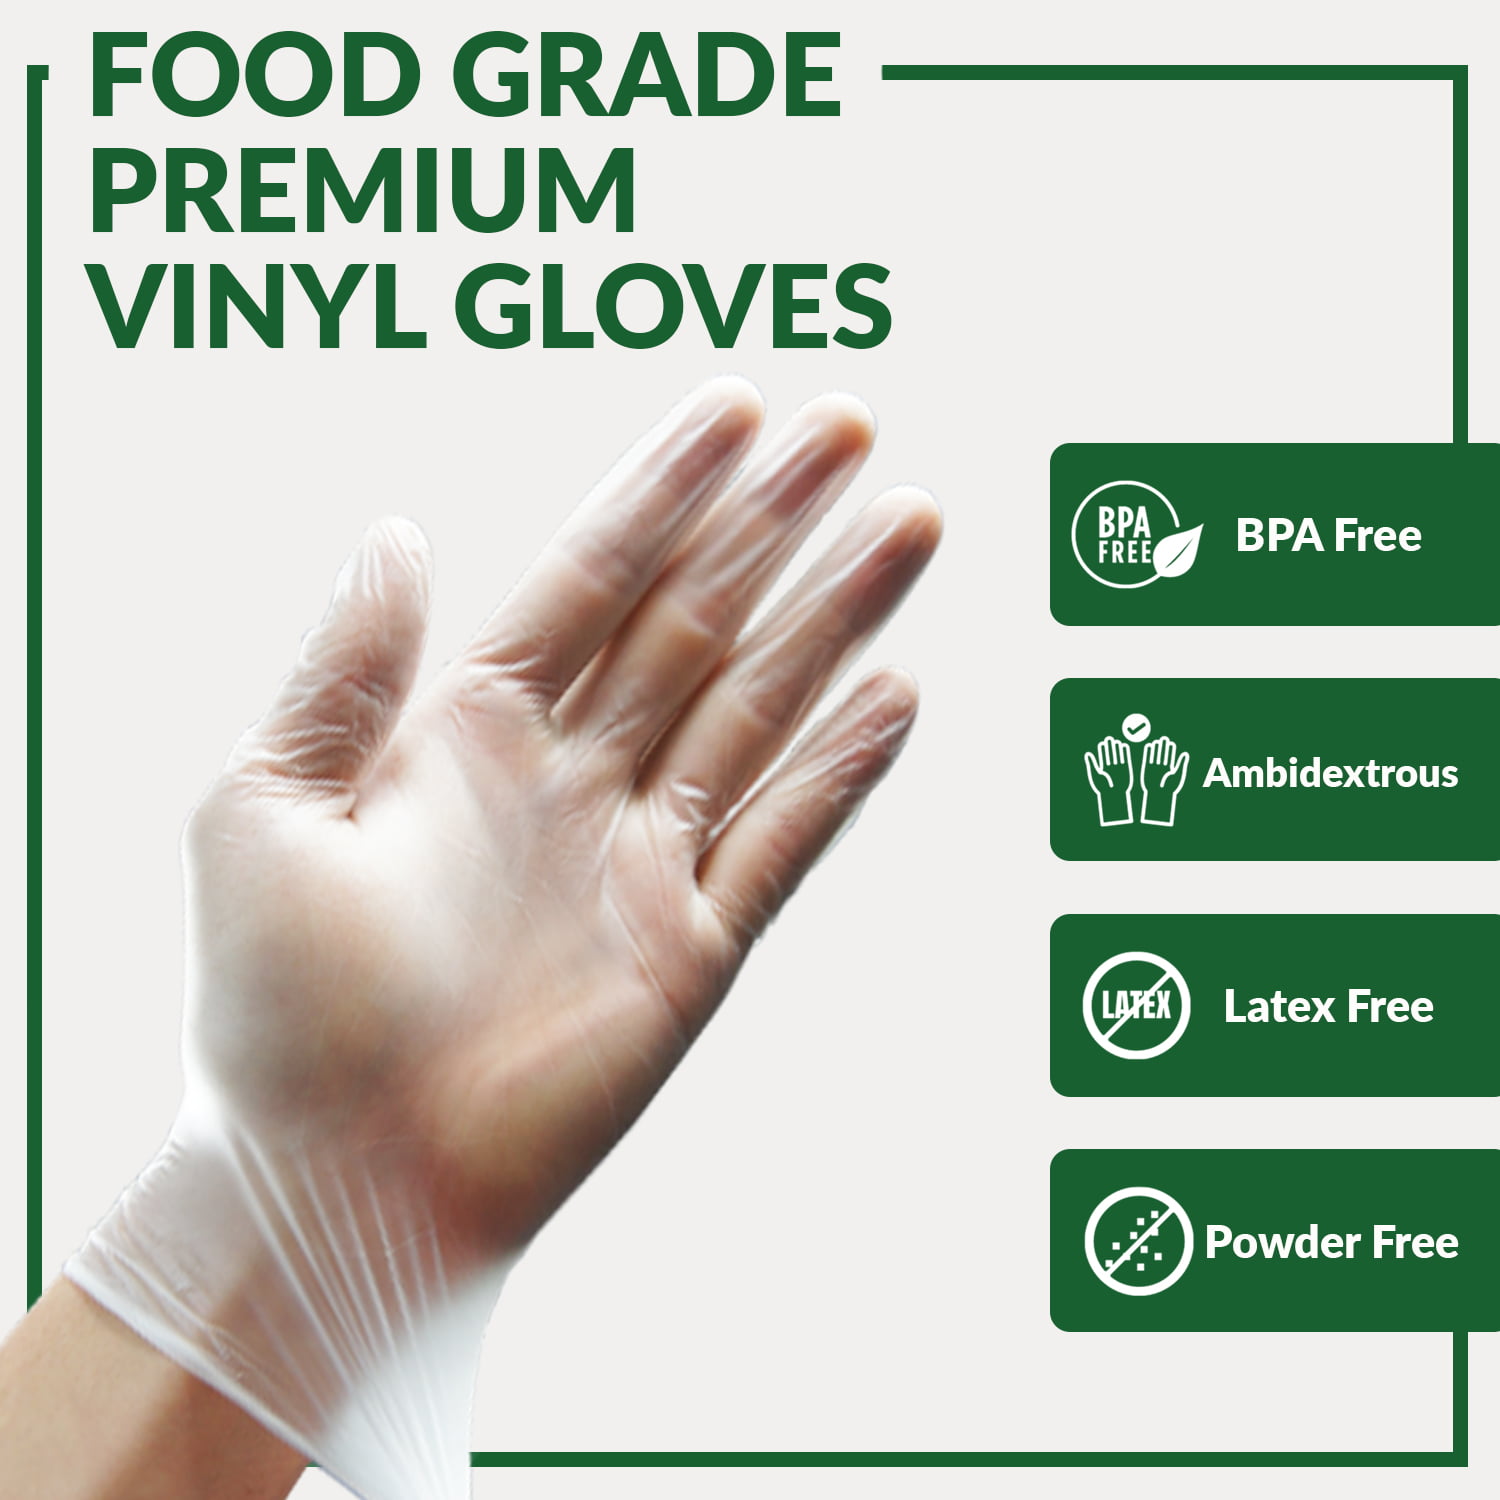 Gorilla Supply Poly Disposable Kitchen PE LDPE Gloves for Kitchen